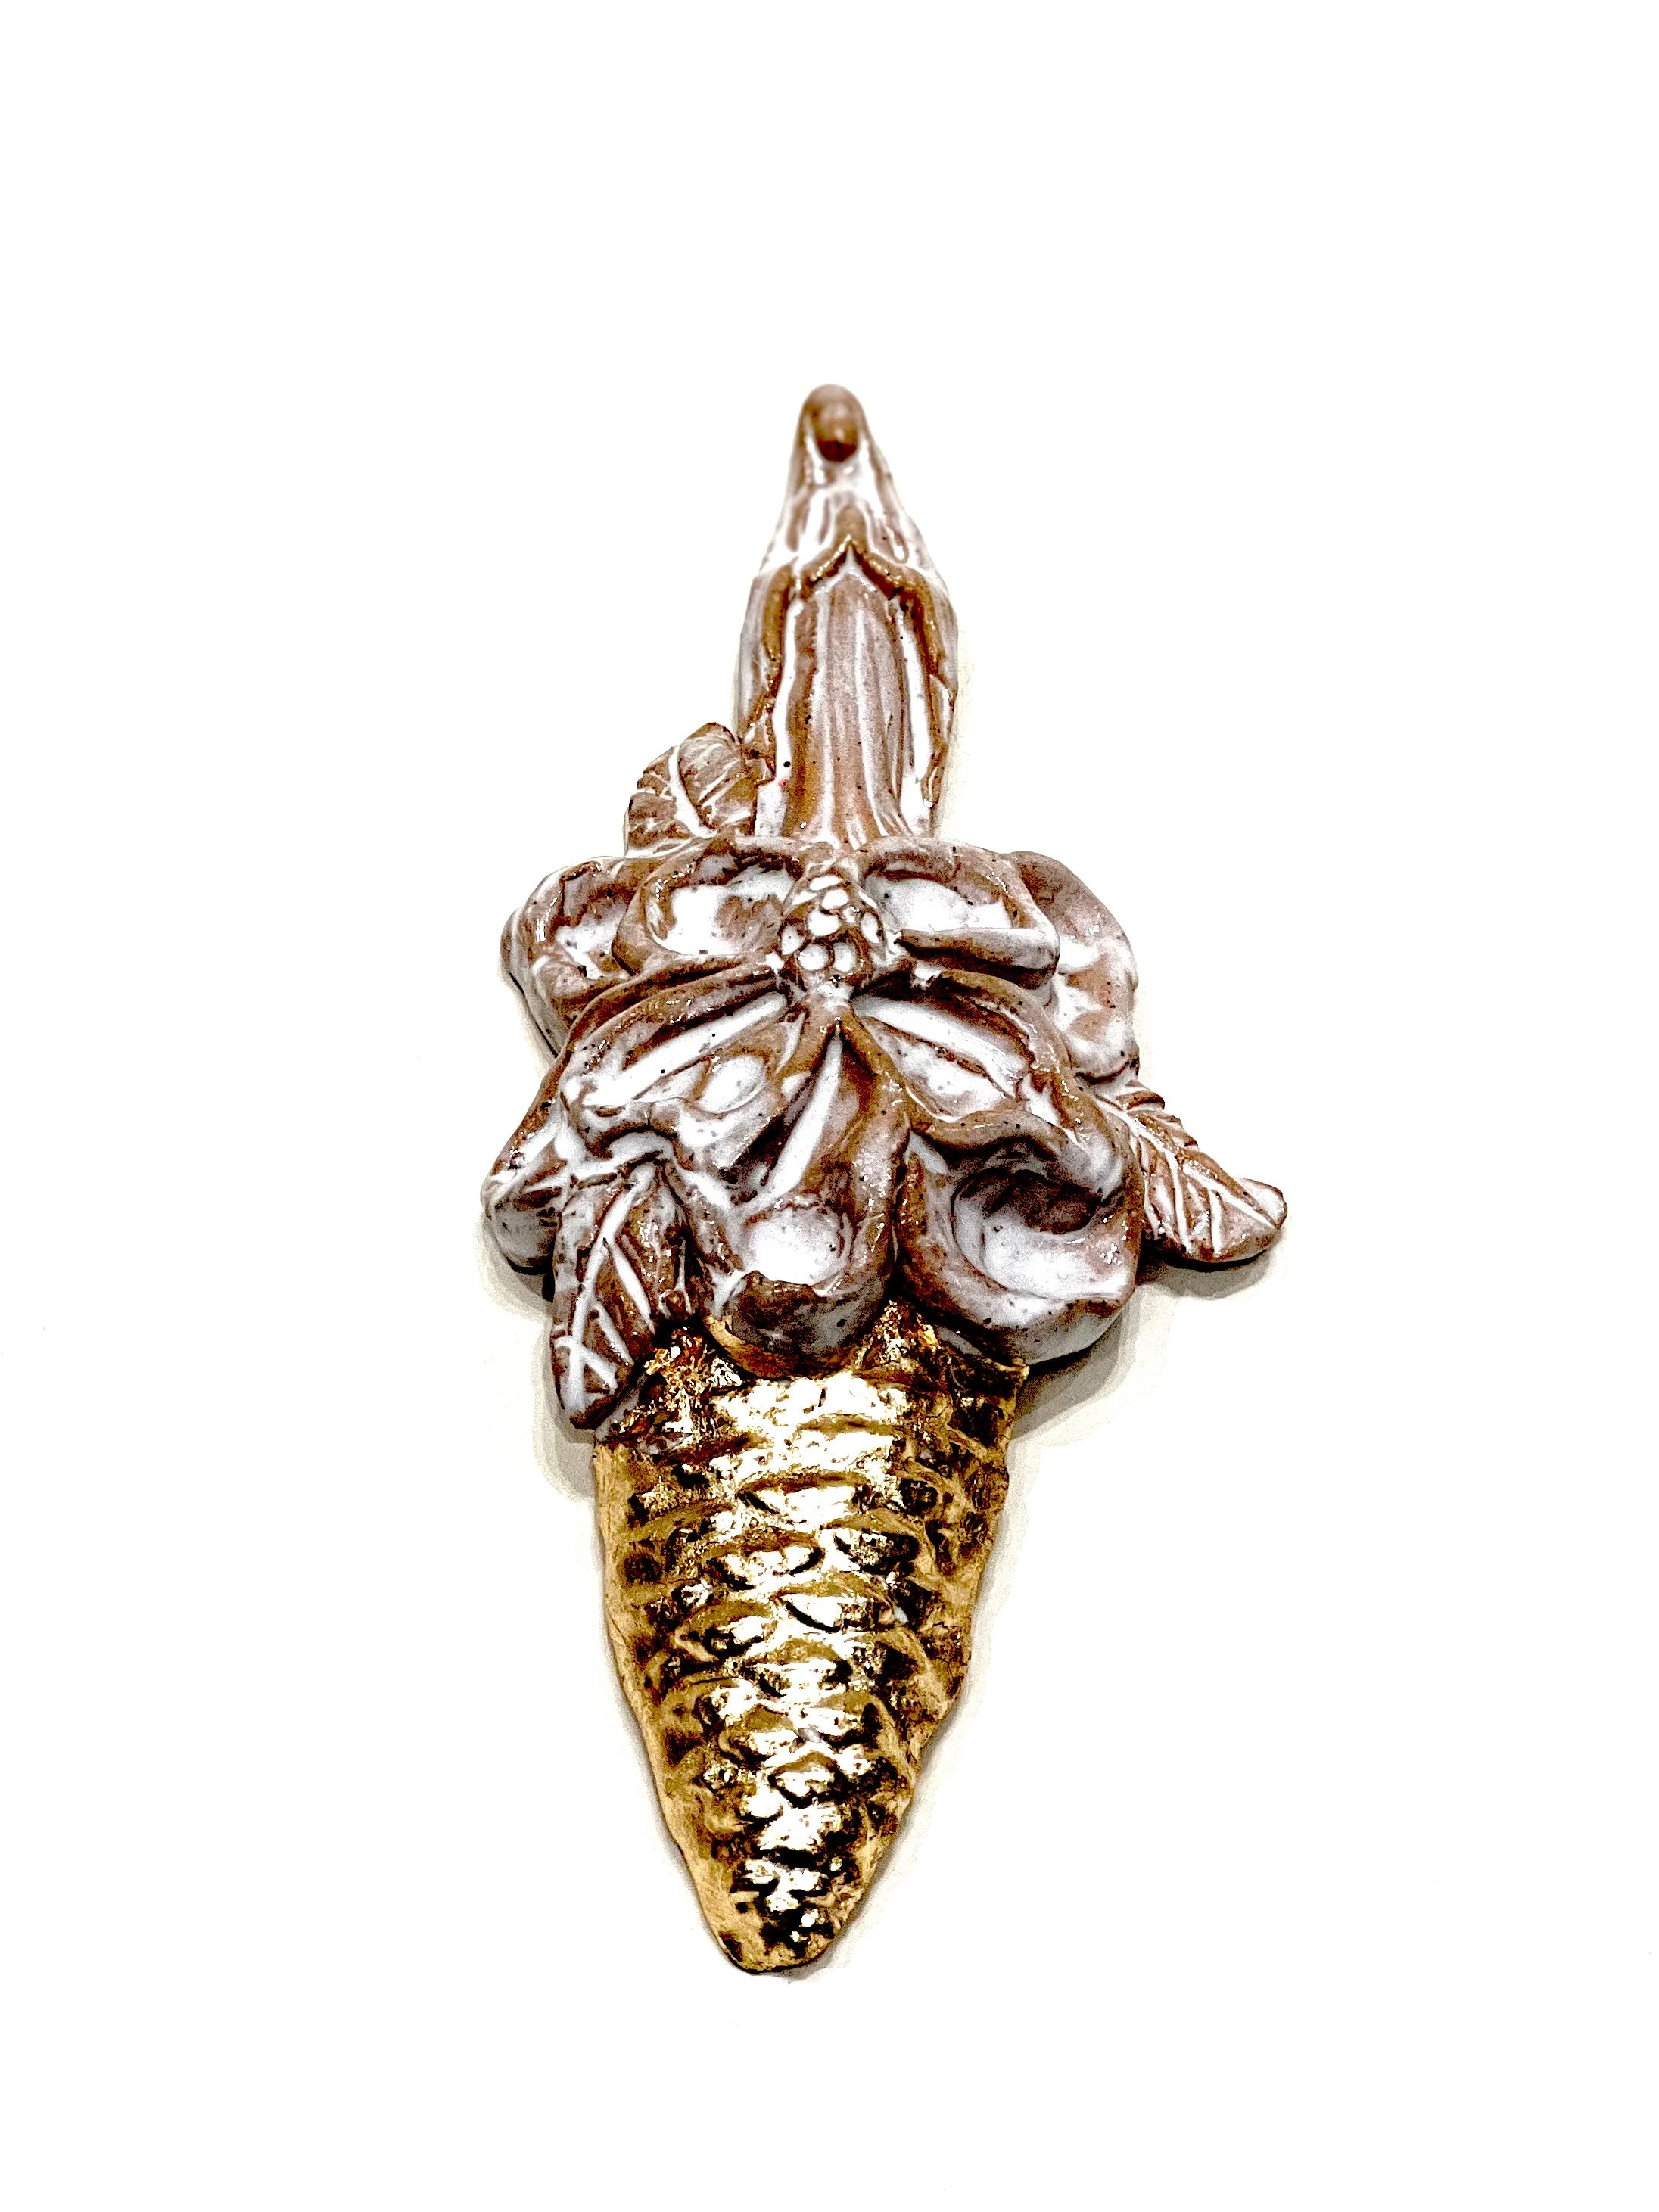 Blessed Mother White Glaze w/ Gold Leaf Pinecone